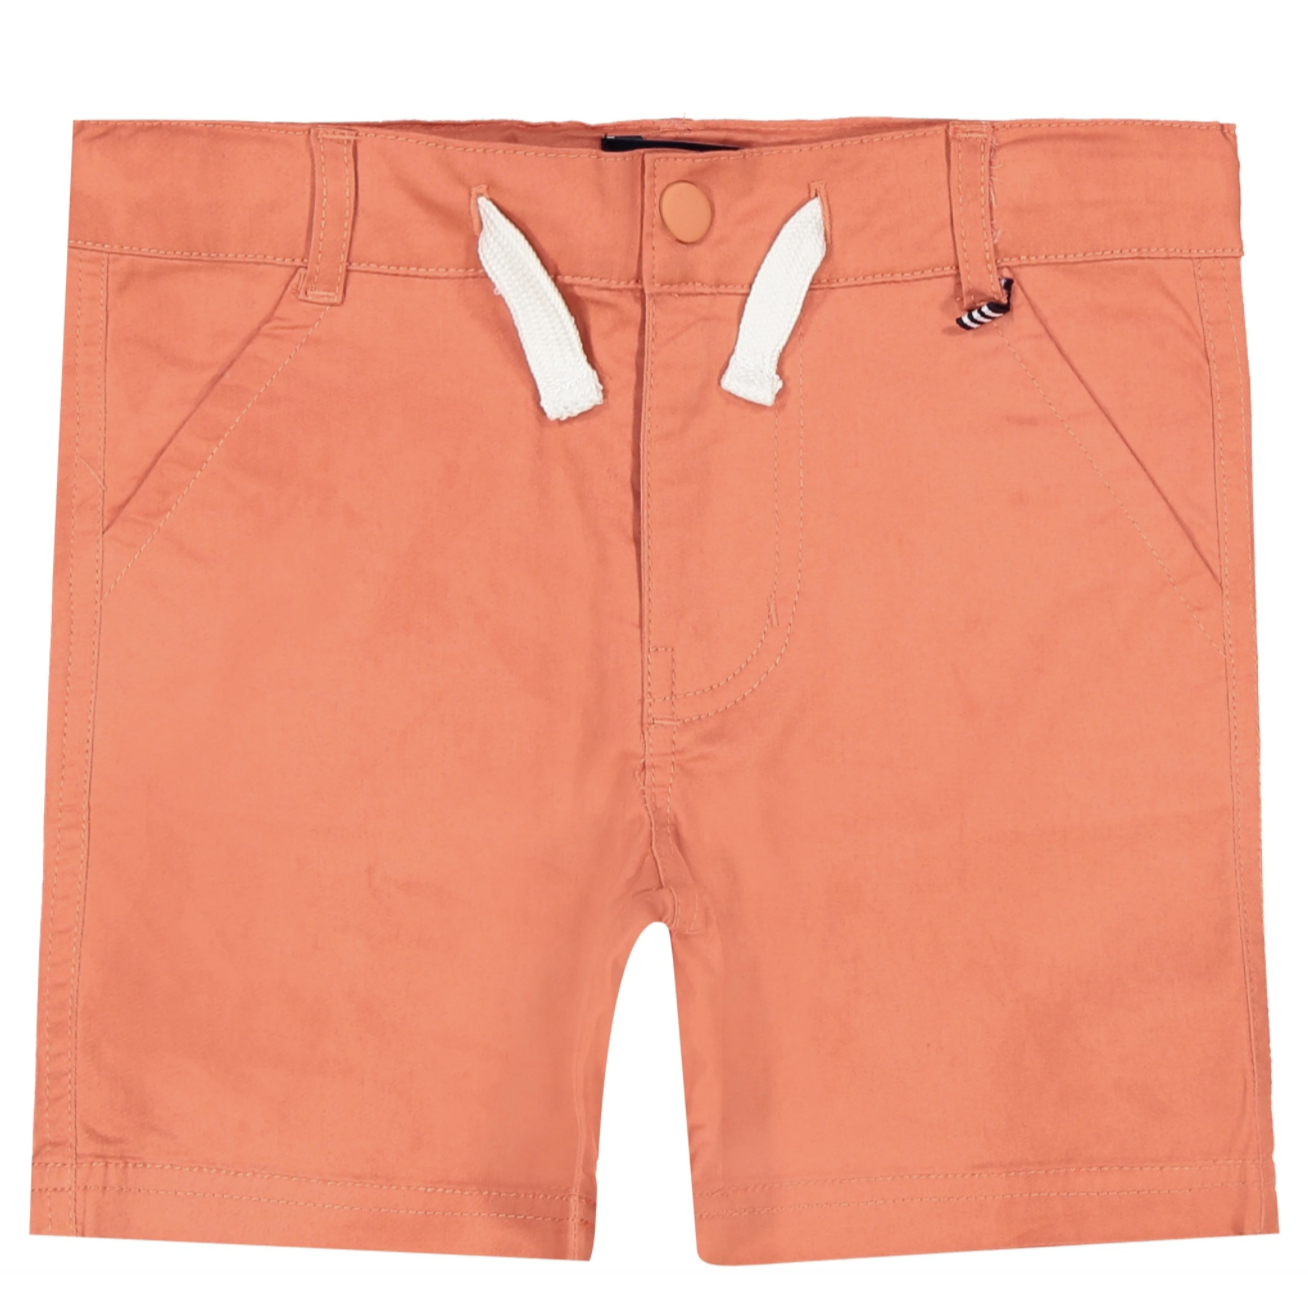 Coral Twill Shorts Tea for Three: A Children's Boutique